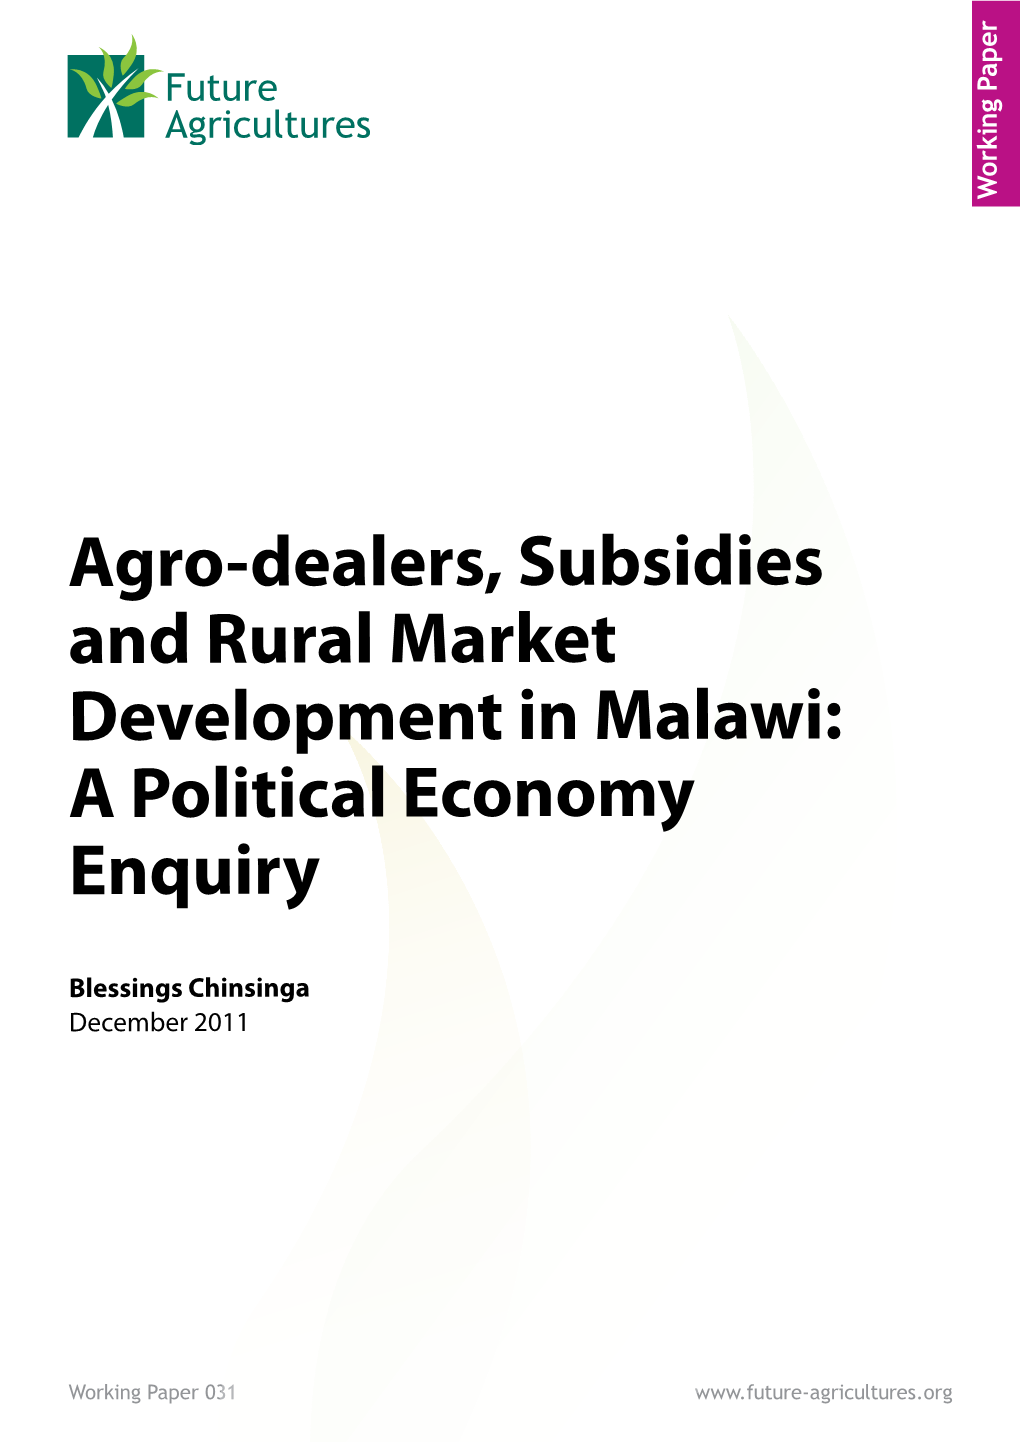 Agro-Dealers, Subsidies and Rural Market Development in Malawi: a Political Economy Enquiry